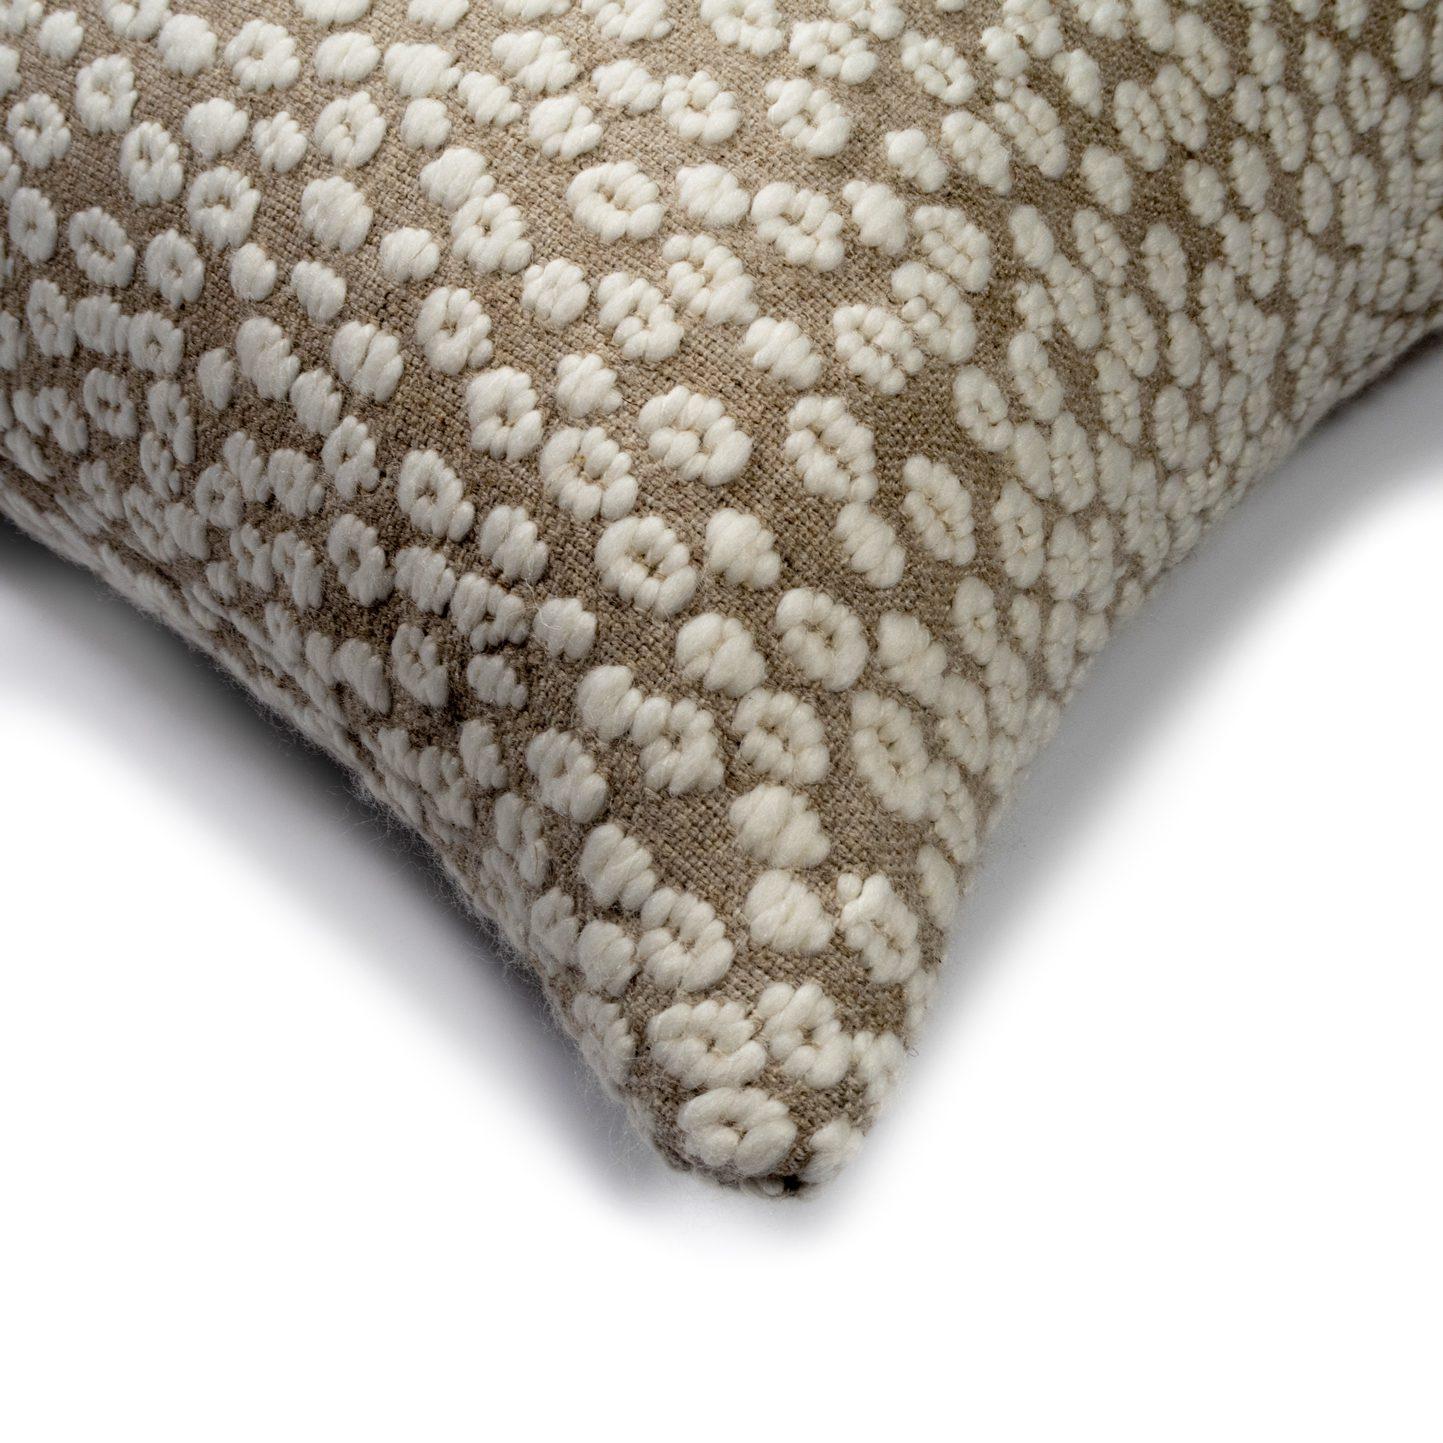 Inspired by the blankets of wildflowers that coat alpine meadows in spring to summer, Alaska is a joy to behold.
The ivory fabric with dotted white droplets adds floral texture where some variety is needed.
Cover a block color sofa with Alaska